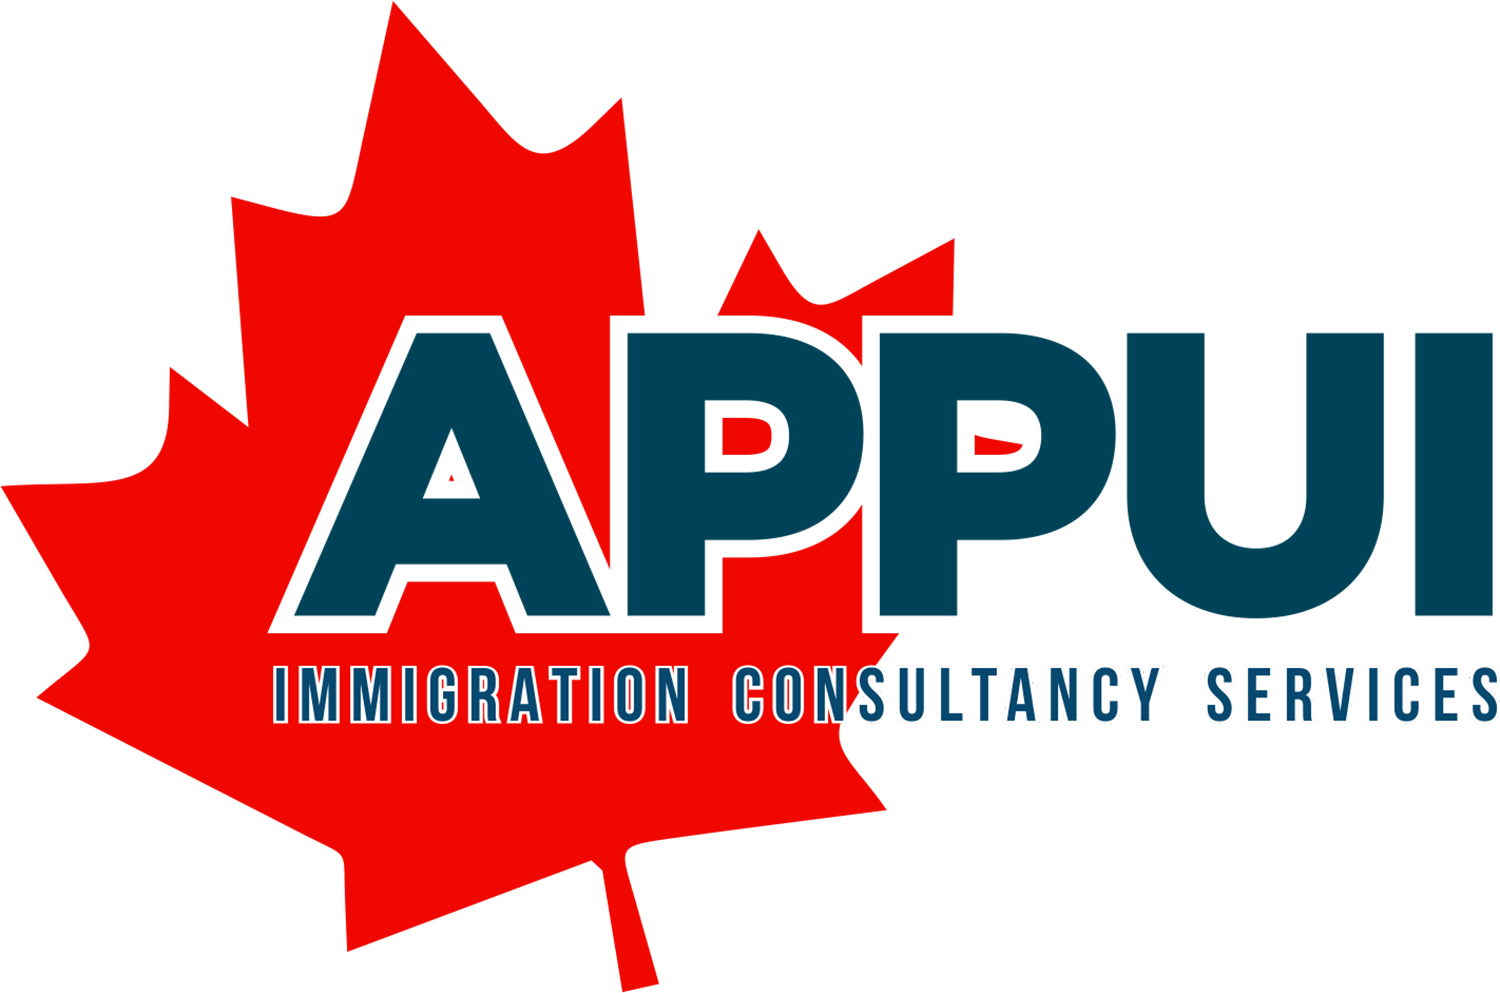 Appui-immigration/Canadian immigration services